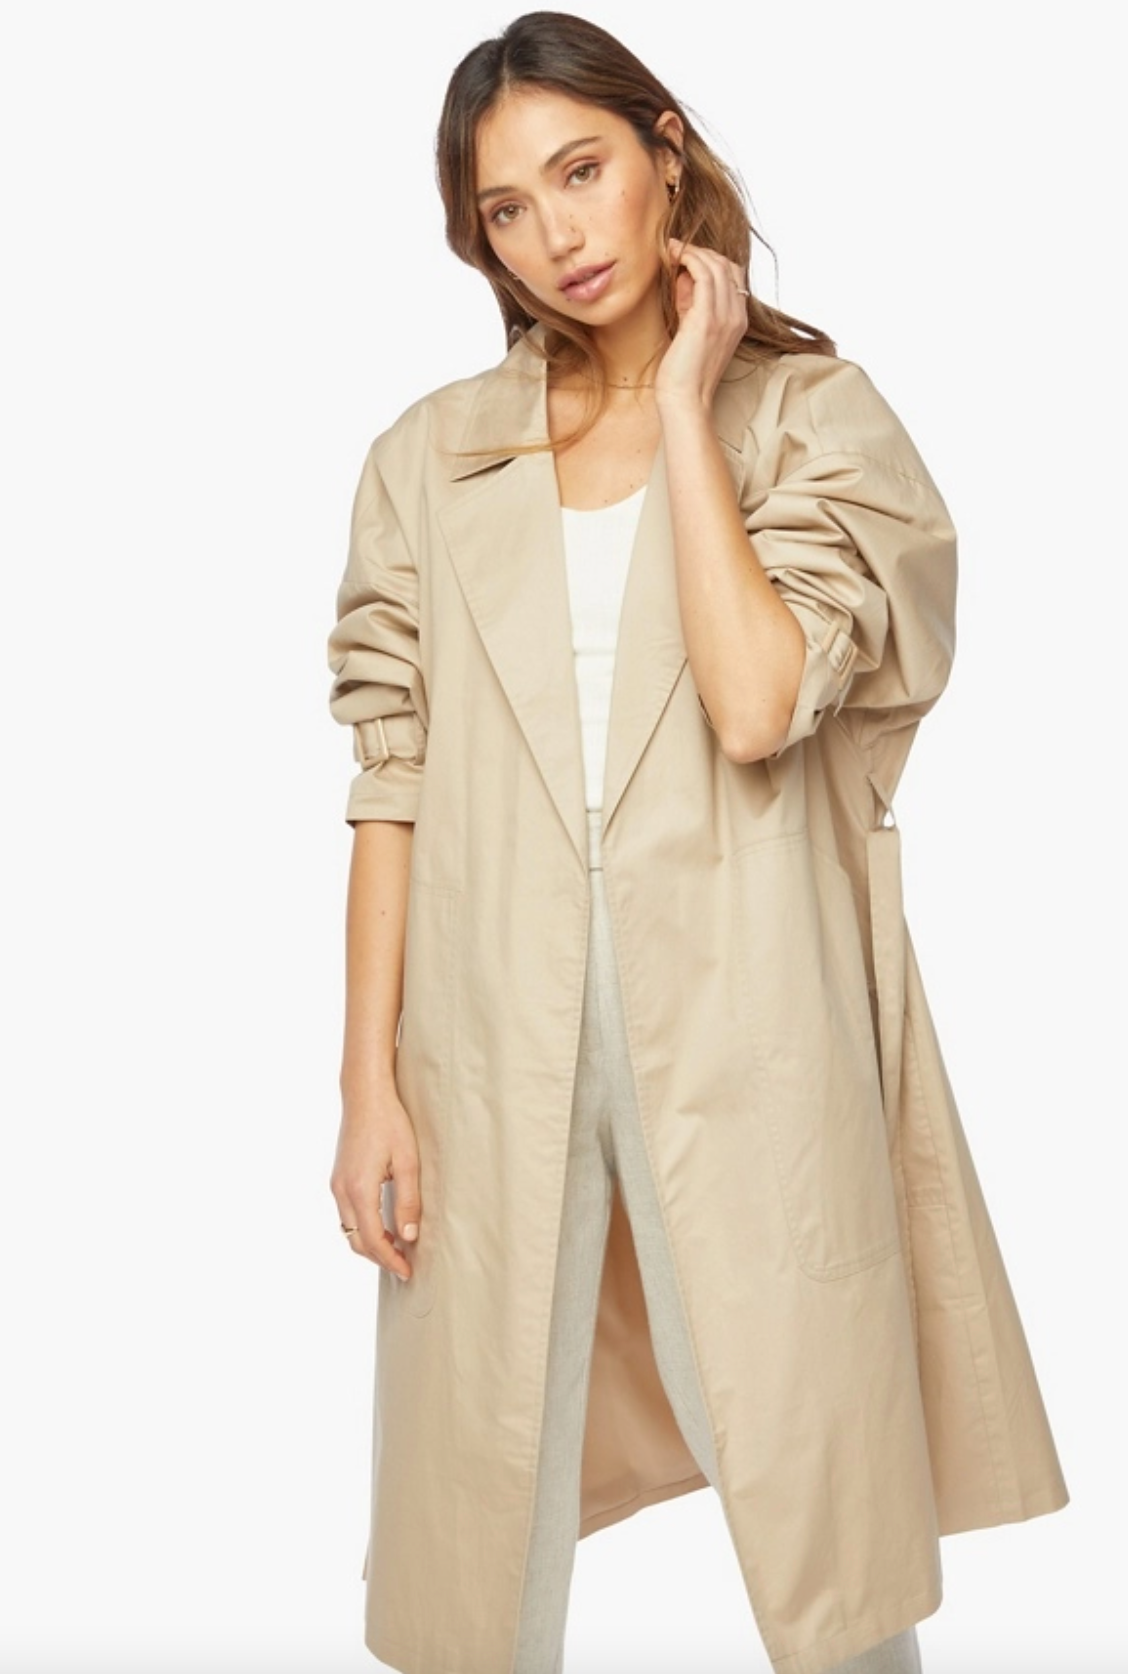 JustFab Lightweight Classic Trench